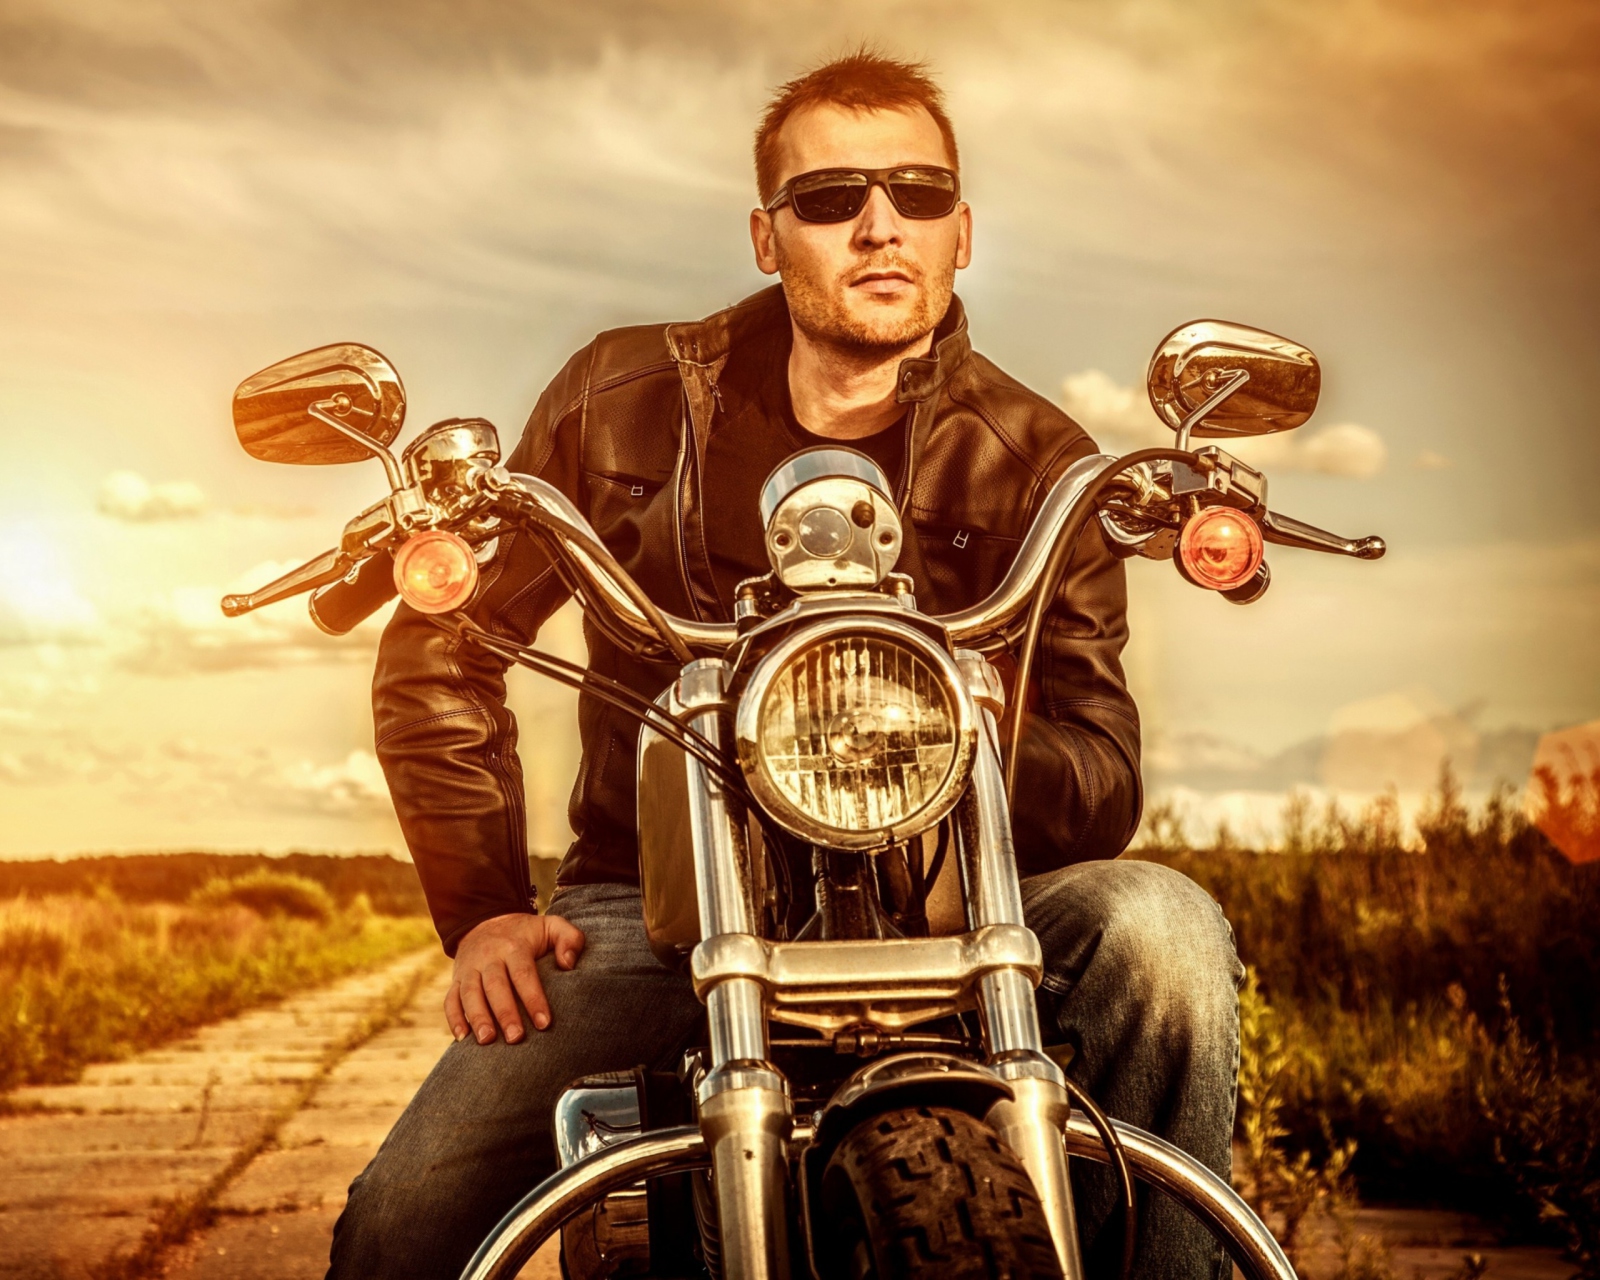 Motorcycle Driver wallpaper 1600x1280